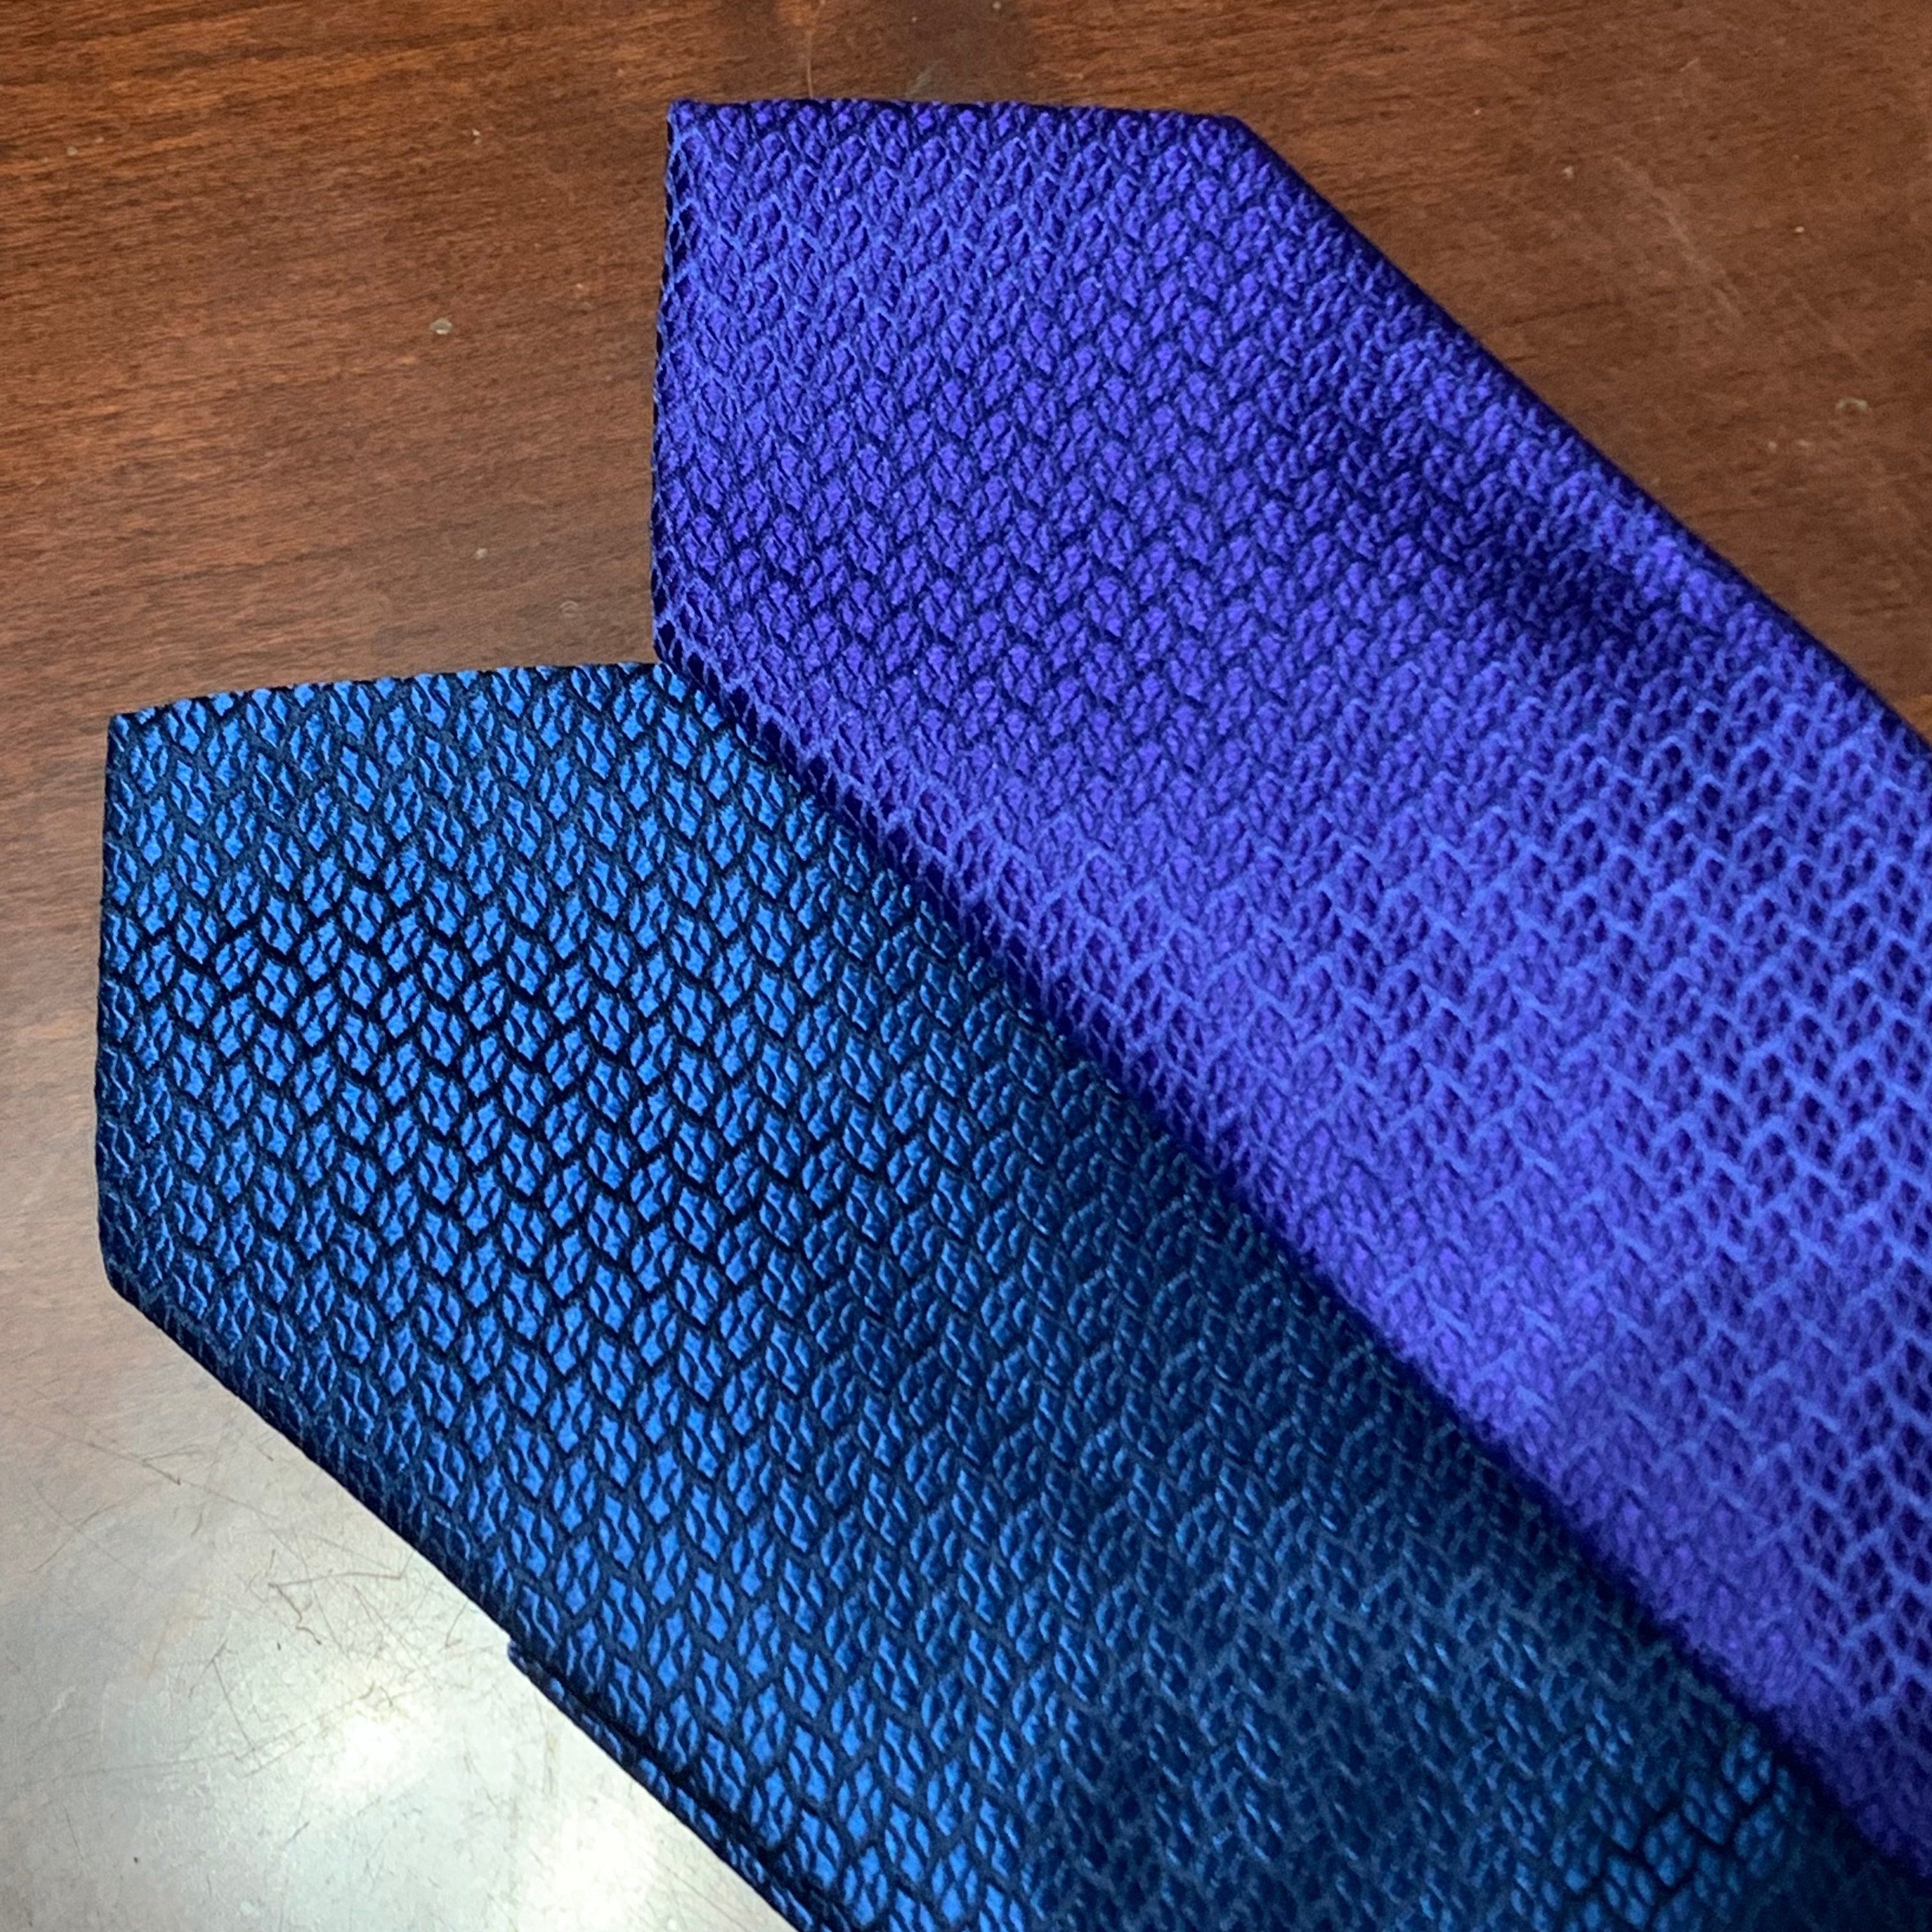 Blue and Purple tie side by side w/o flash